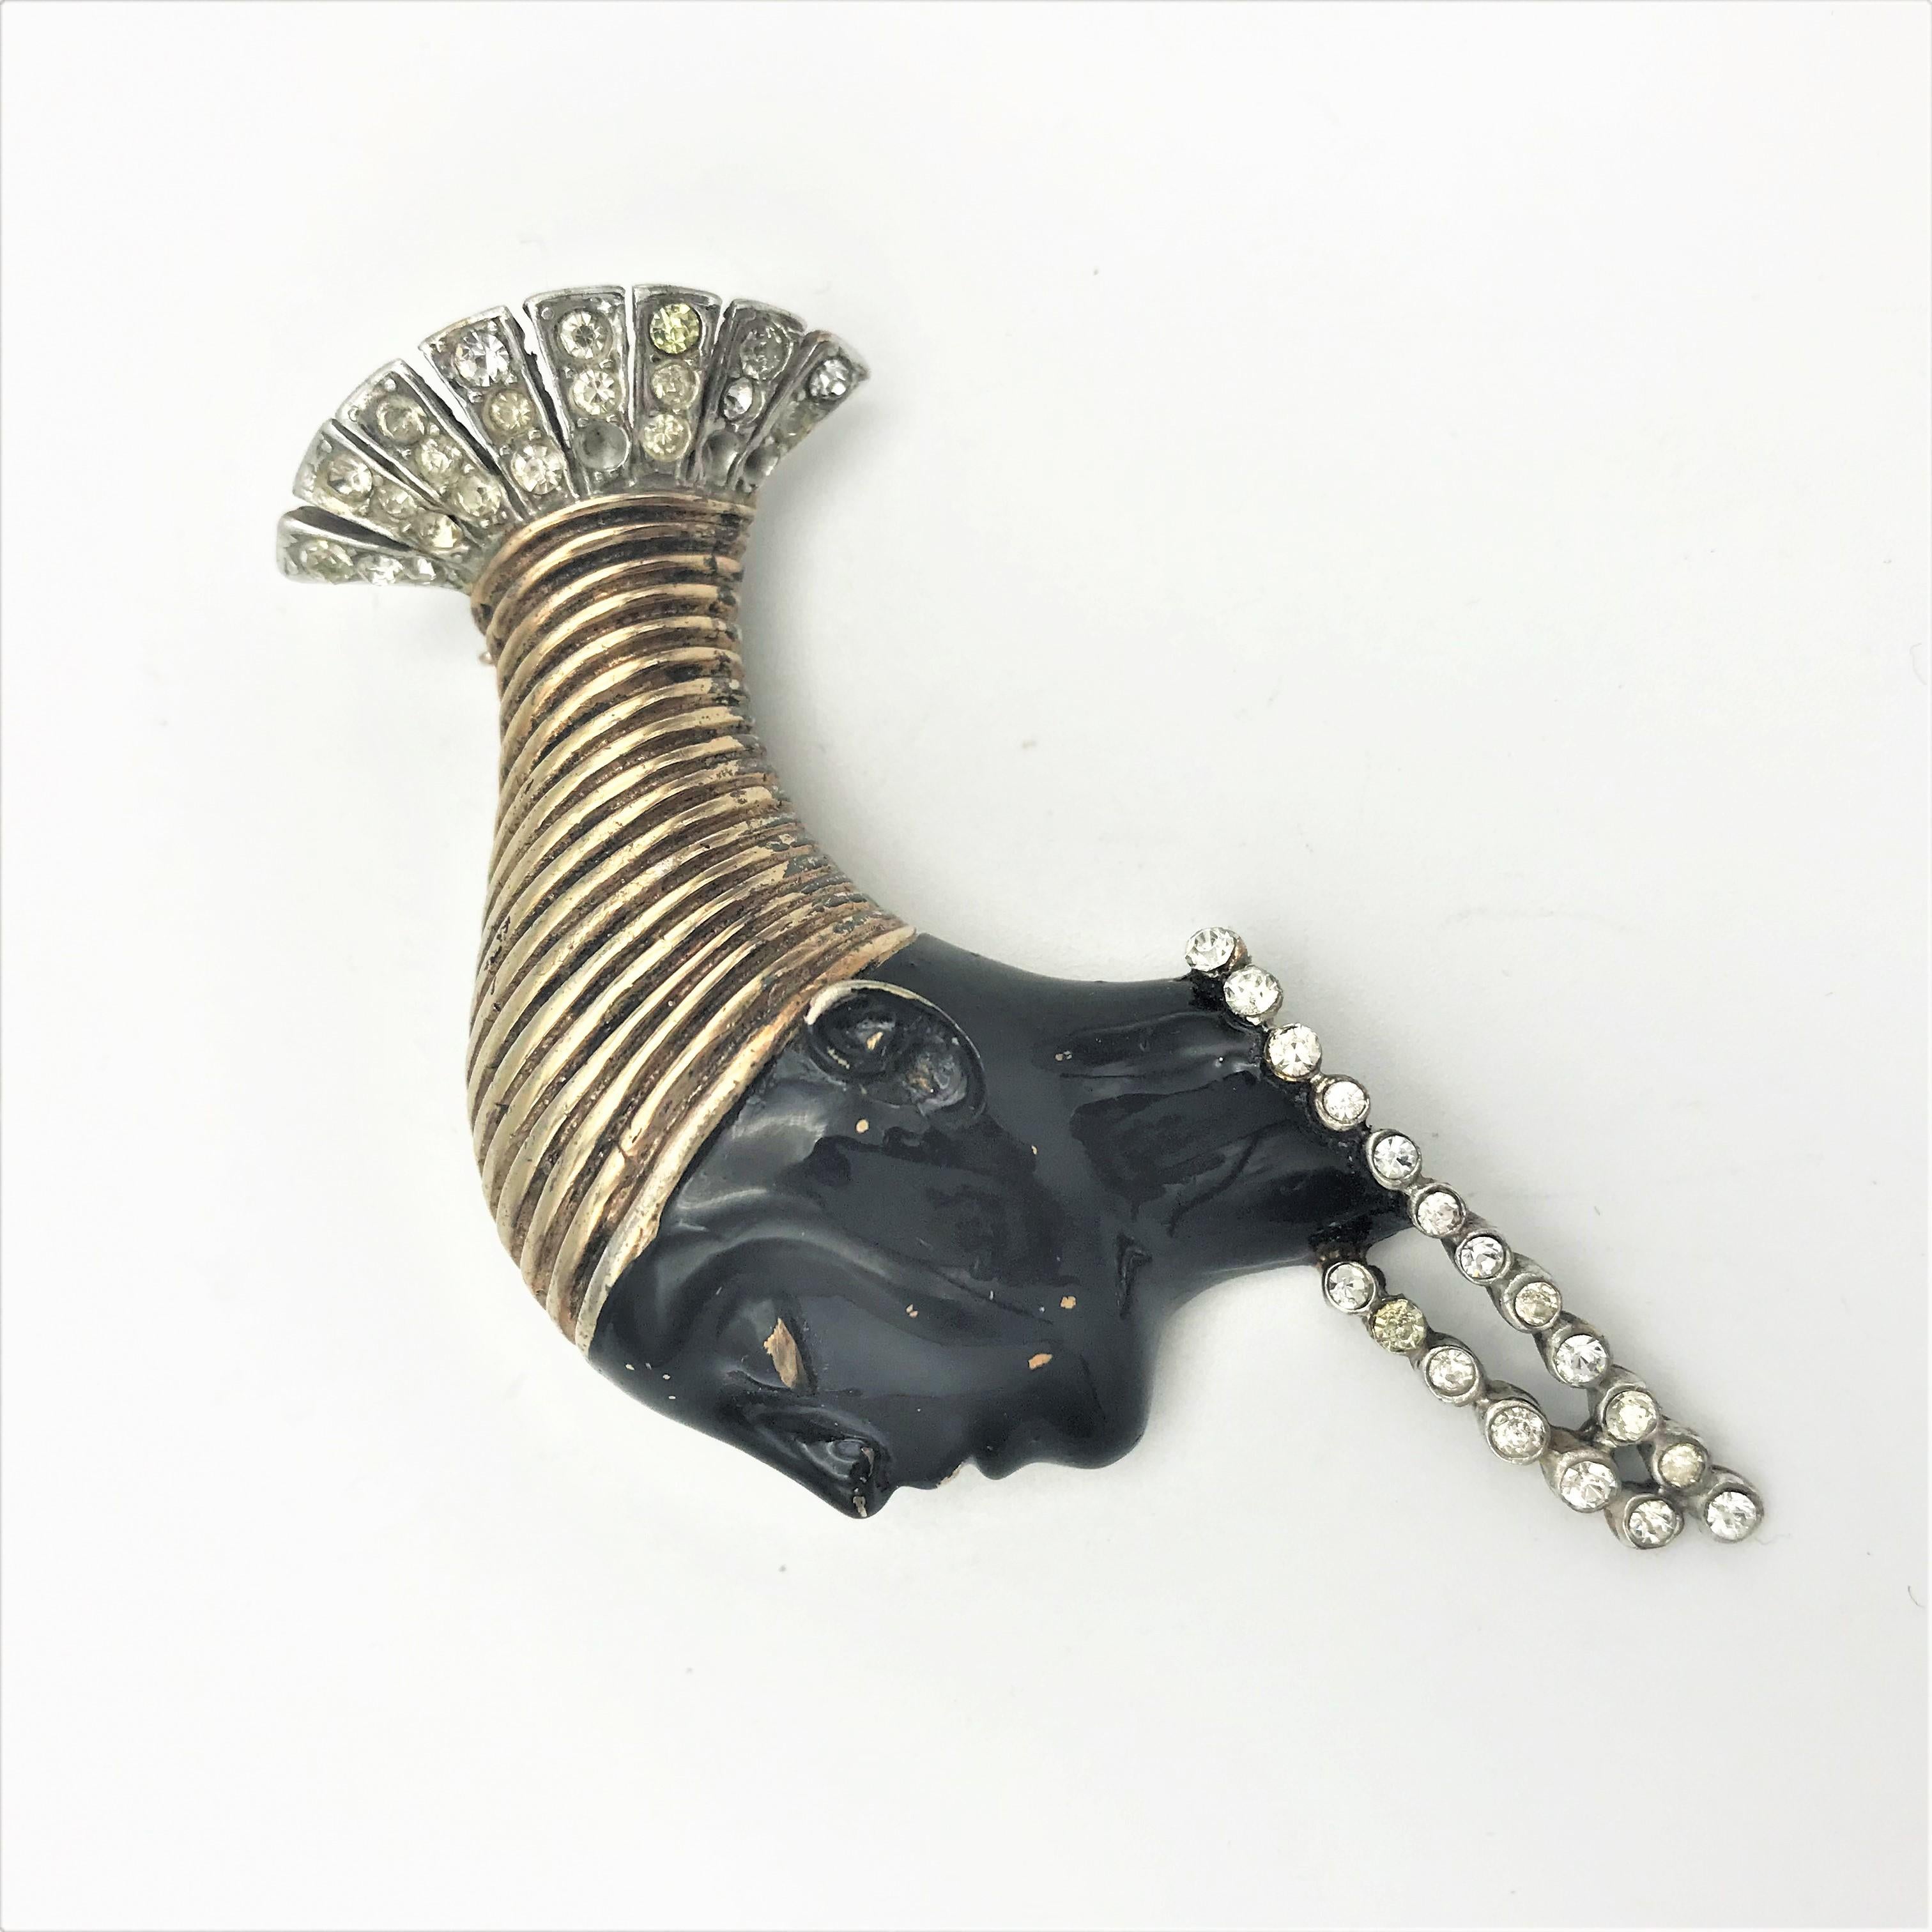 About
an other Africana 'Nubian Head' wearing a necklace ,features giossy black enamel and metallic.Sterling vermeil NY 1946
Measurement
Higth 7 cn 
breadth of face 2,5 cm 
necklace 2,5 cm long
Features
- original Reja, designed by Solomon